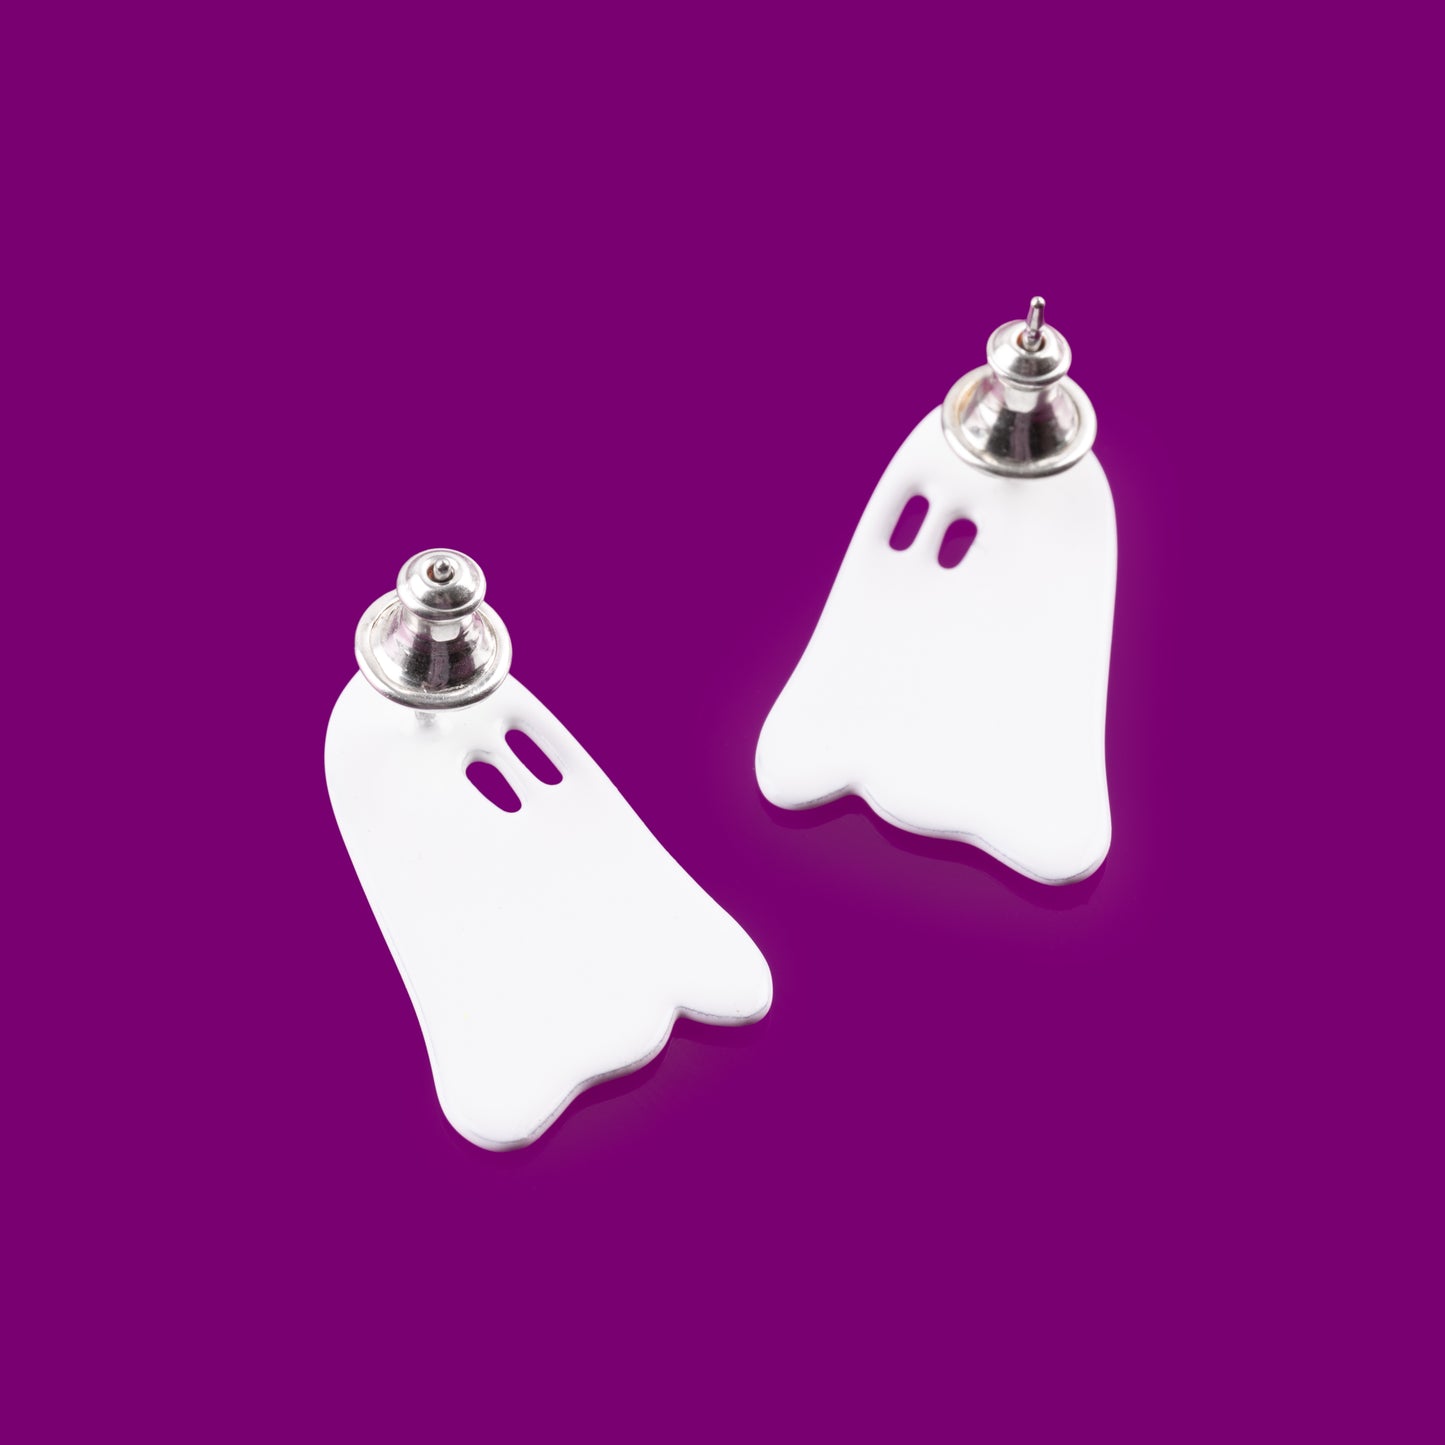 Short Lil Ghosts